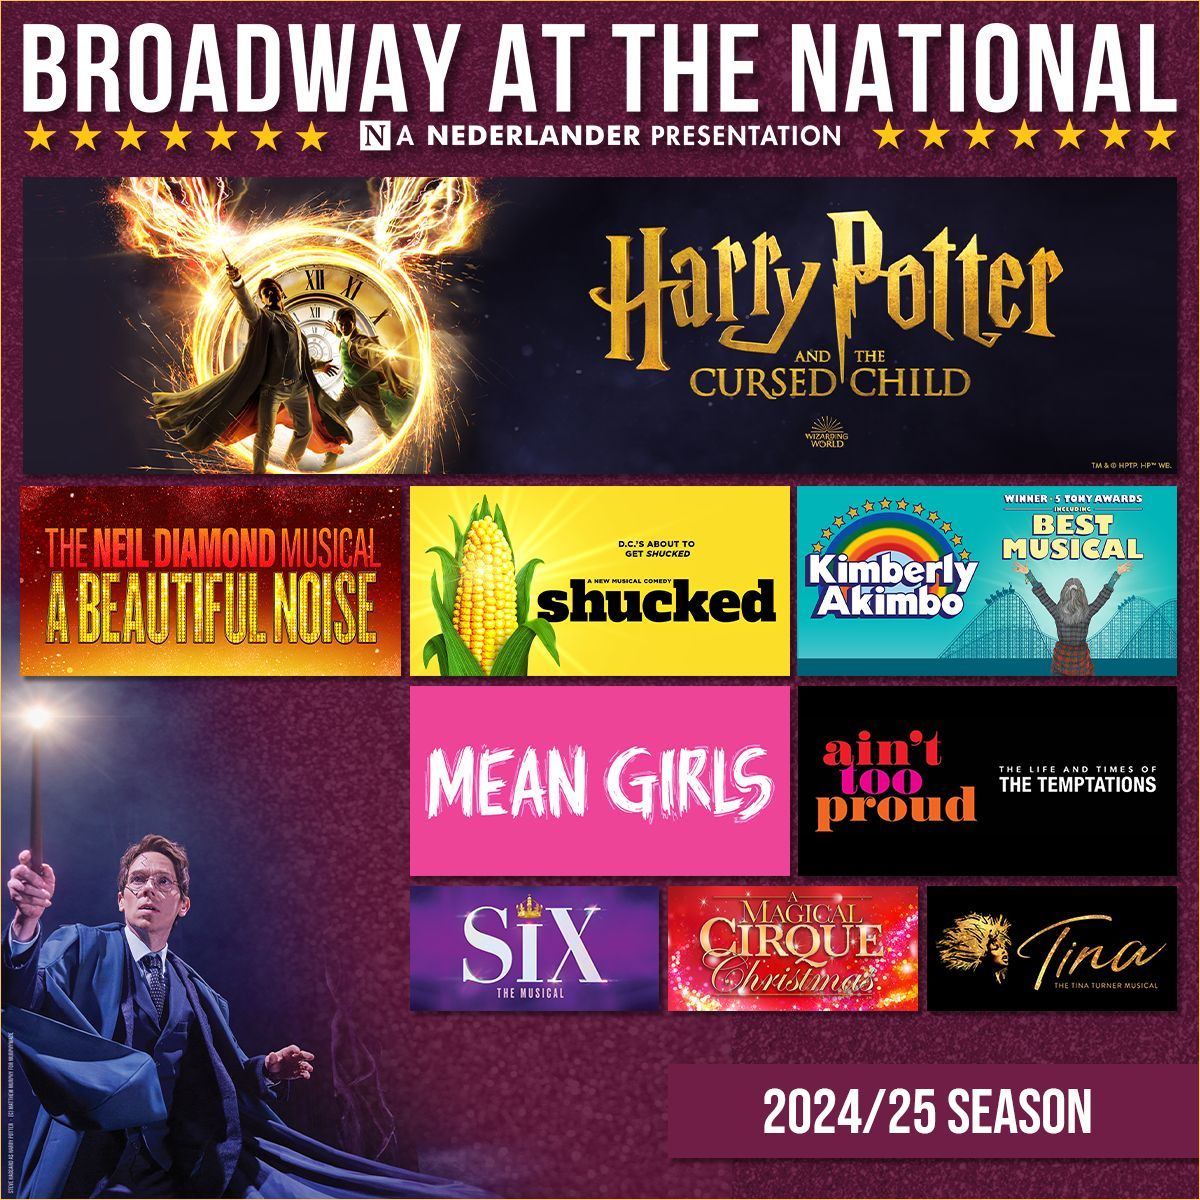 🎭 NEW SEASON ALERT: Broadway at The National is thrilled to announce our MAGICAL 2024/2025 season. Season packages are now on sale! Visit the link in our bio to learn more. Let us know which show(s) you're excited to see.